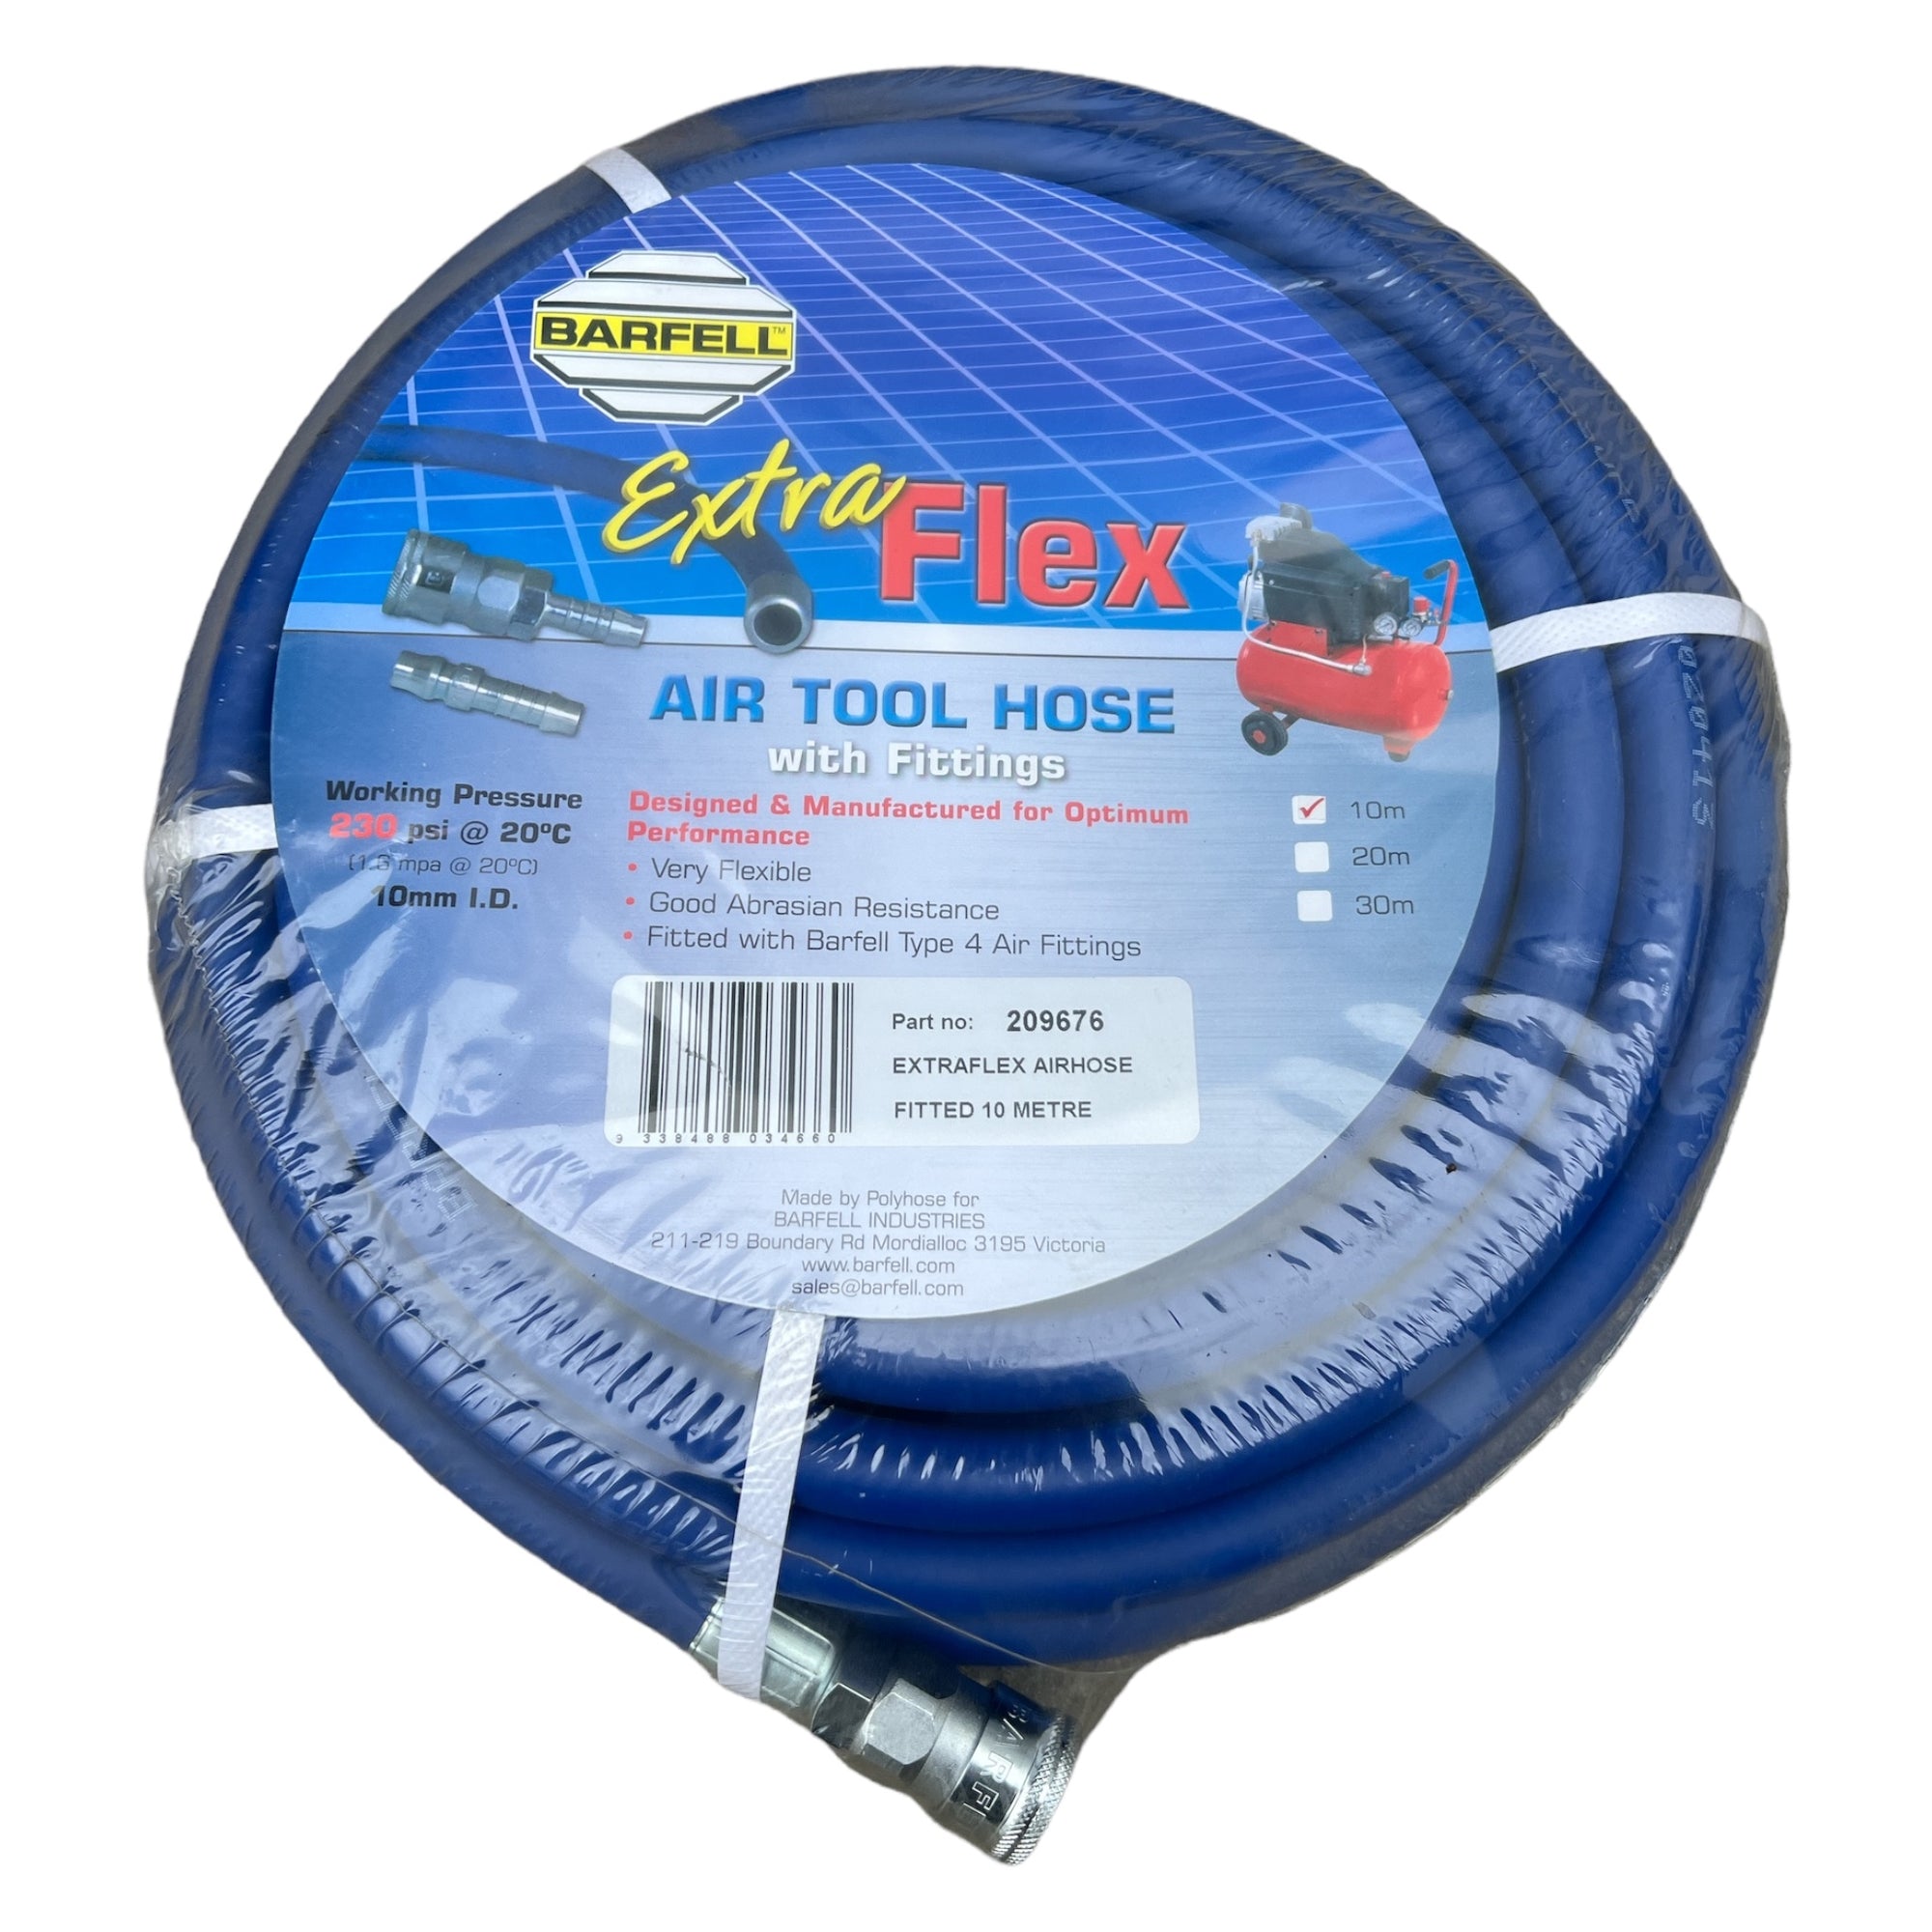 Barfell ExtraFlex Air Hose with Fittings 10mm x 10mt Clearance Stock